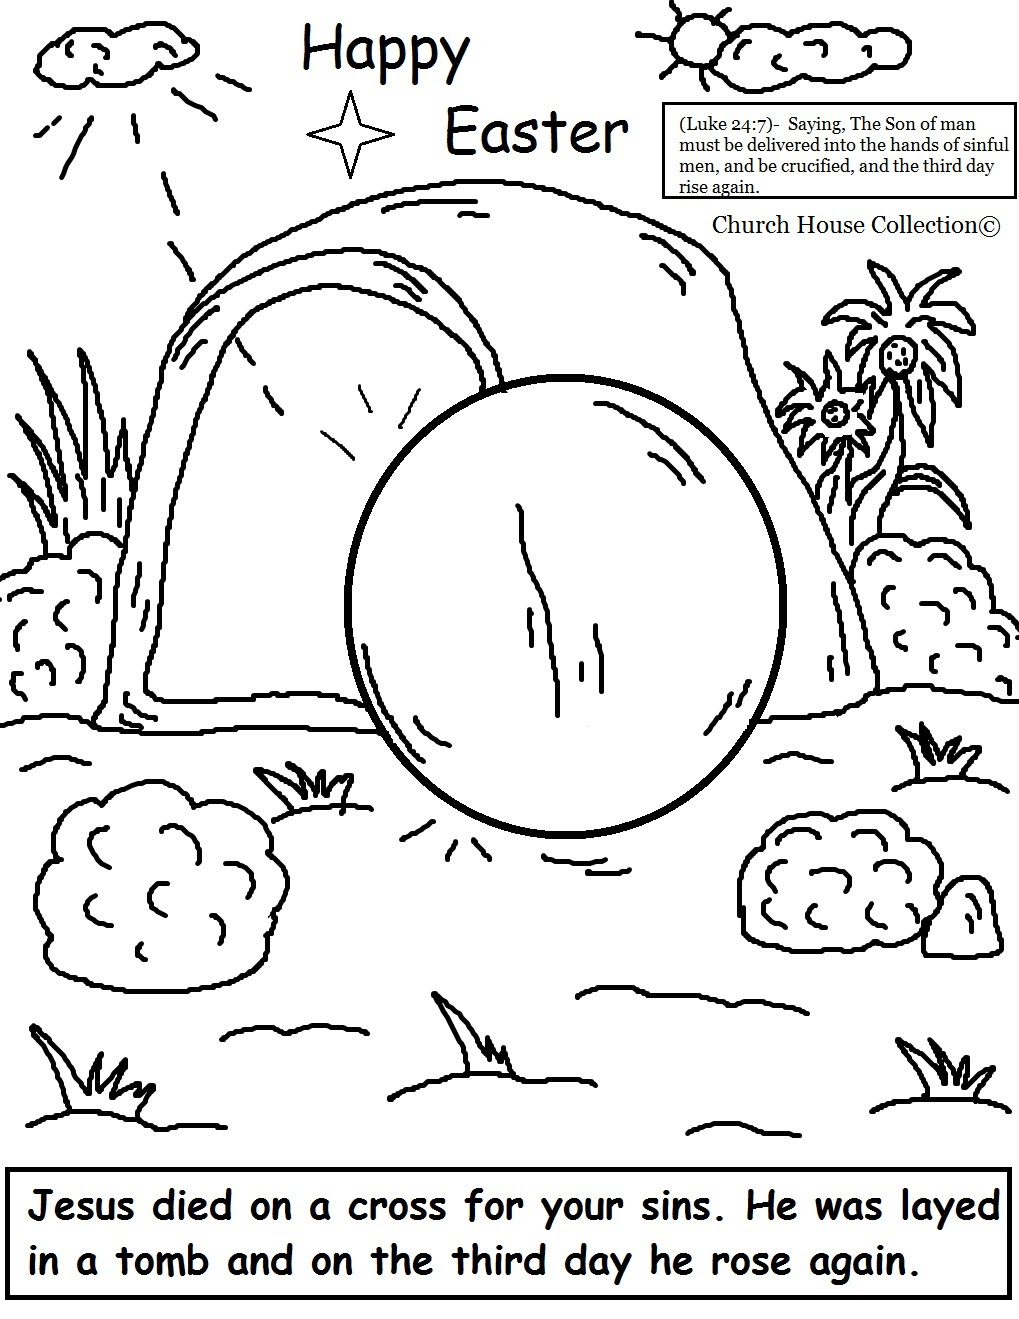 Printable Religious Easter Coloring Pages | Coloring Pages For Kids